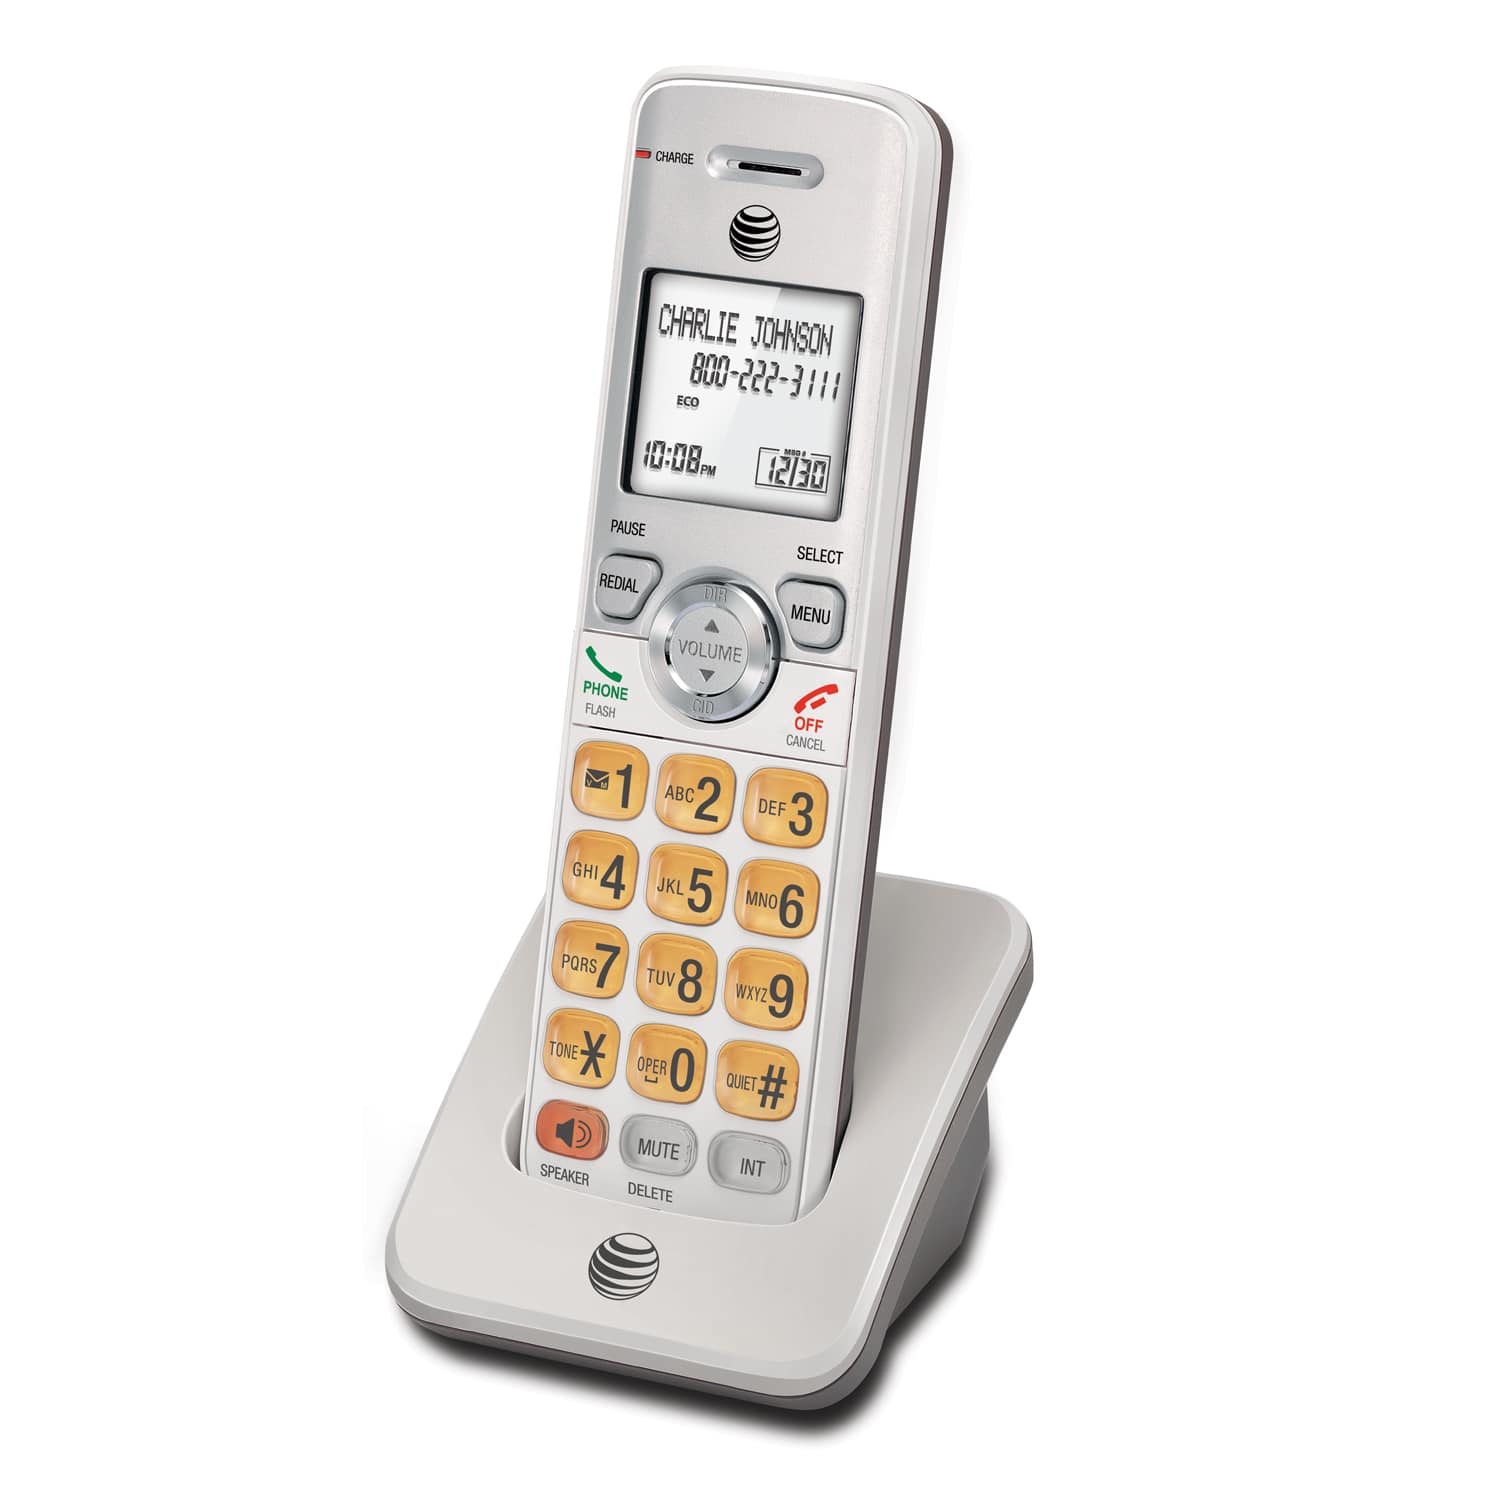 Accessory handset with Caller ID/call waiting - view 2